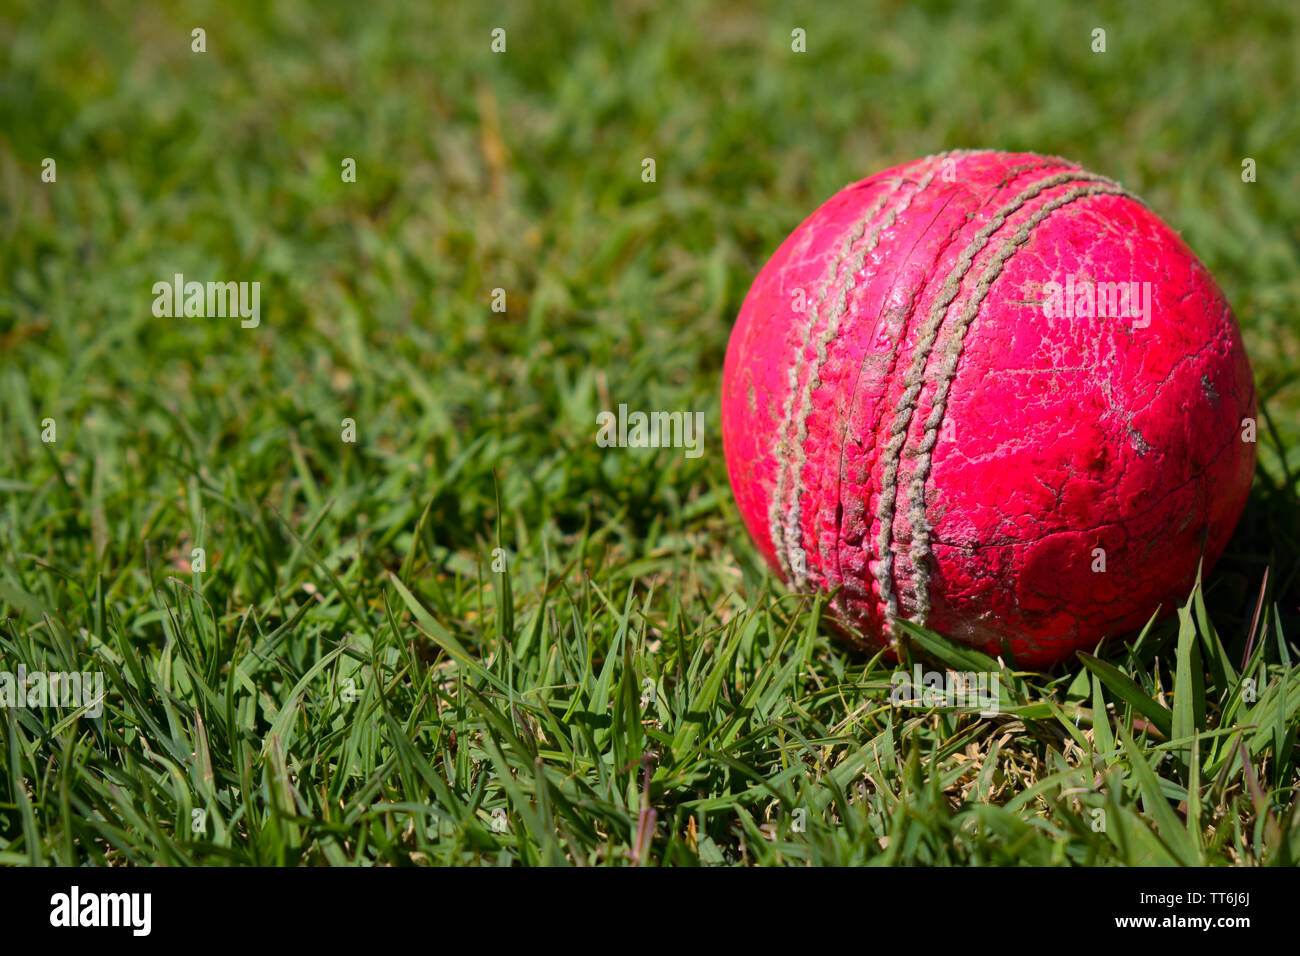 Cricket ball isolated on a grass. Colour of ball is pink. cricket ball in the playground. Stock Photo